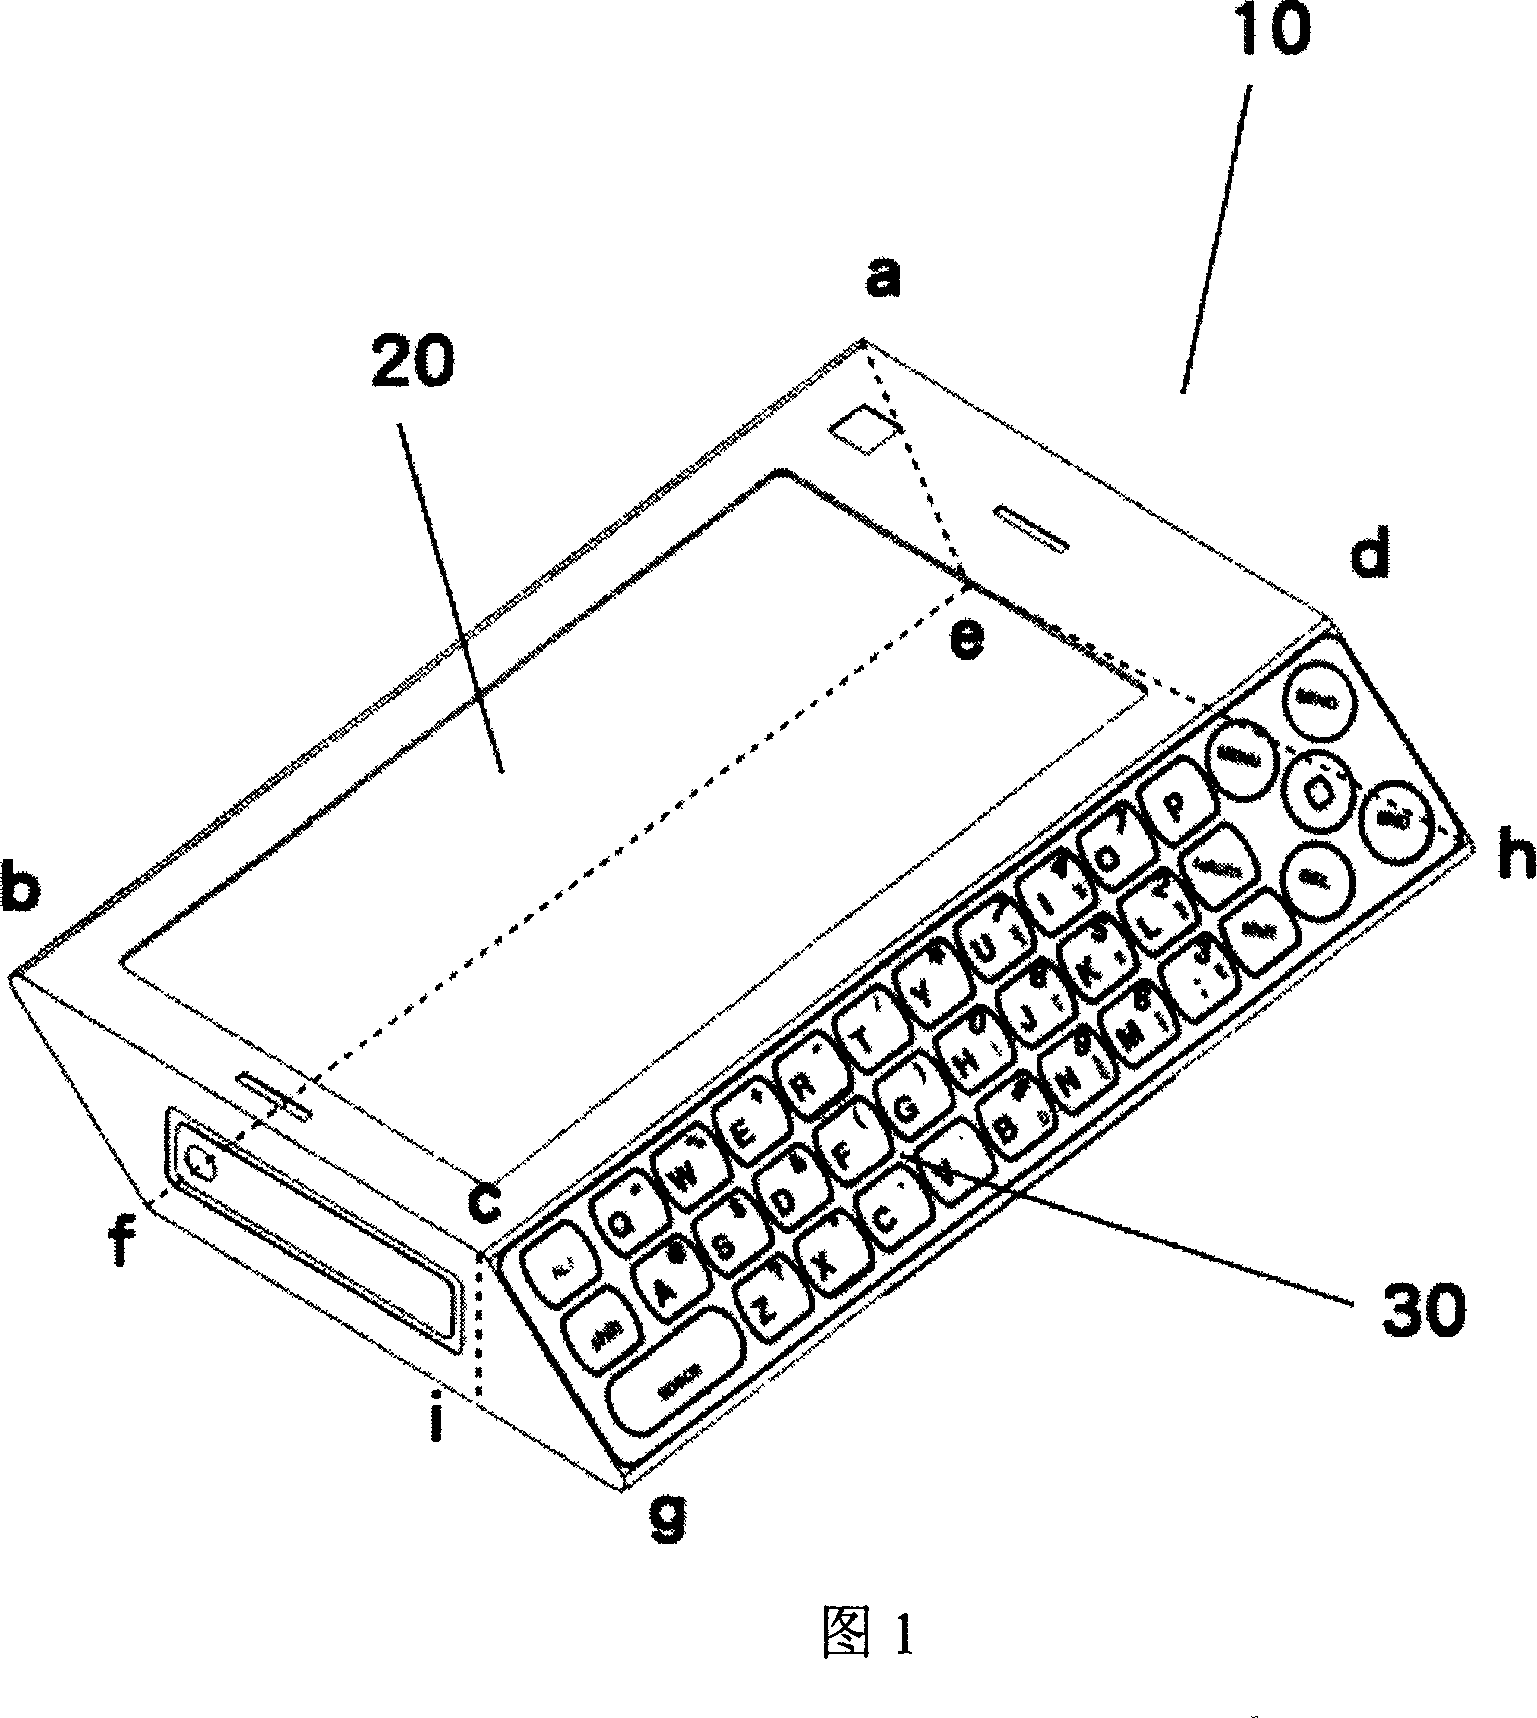 Hand-held information terminal device